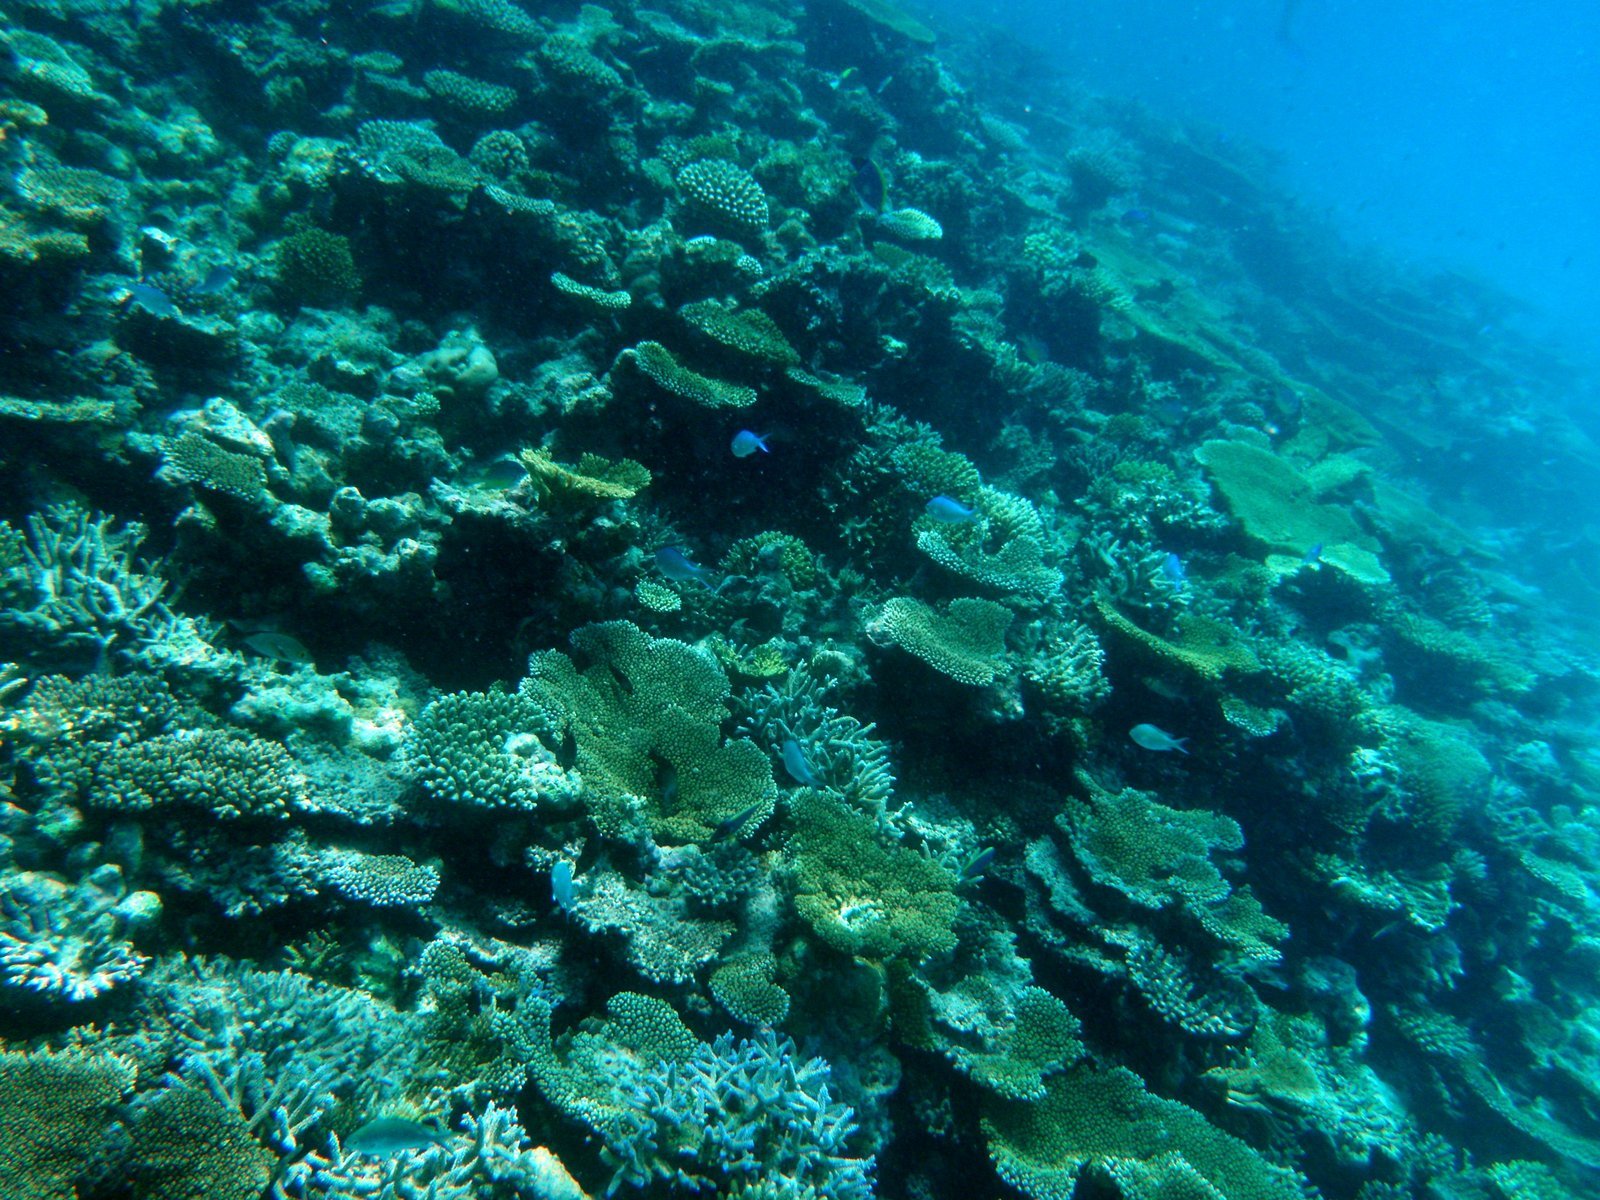 a very large, colorful coral reef covers the surface